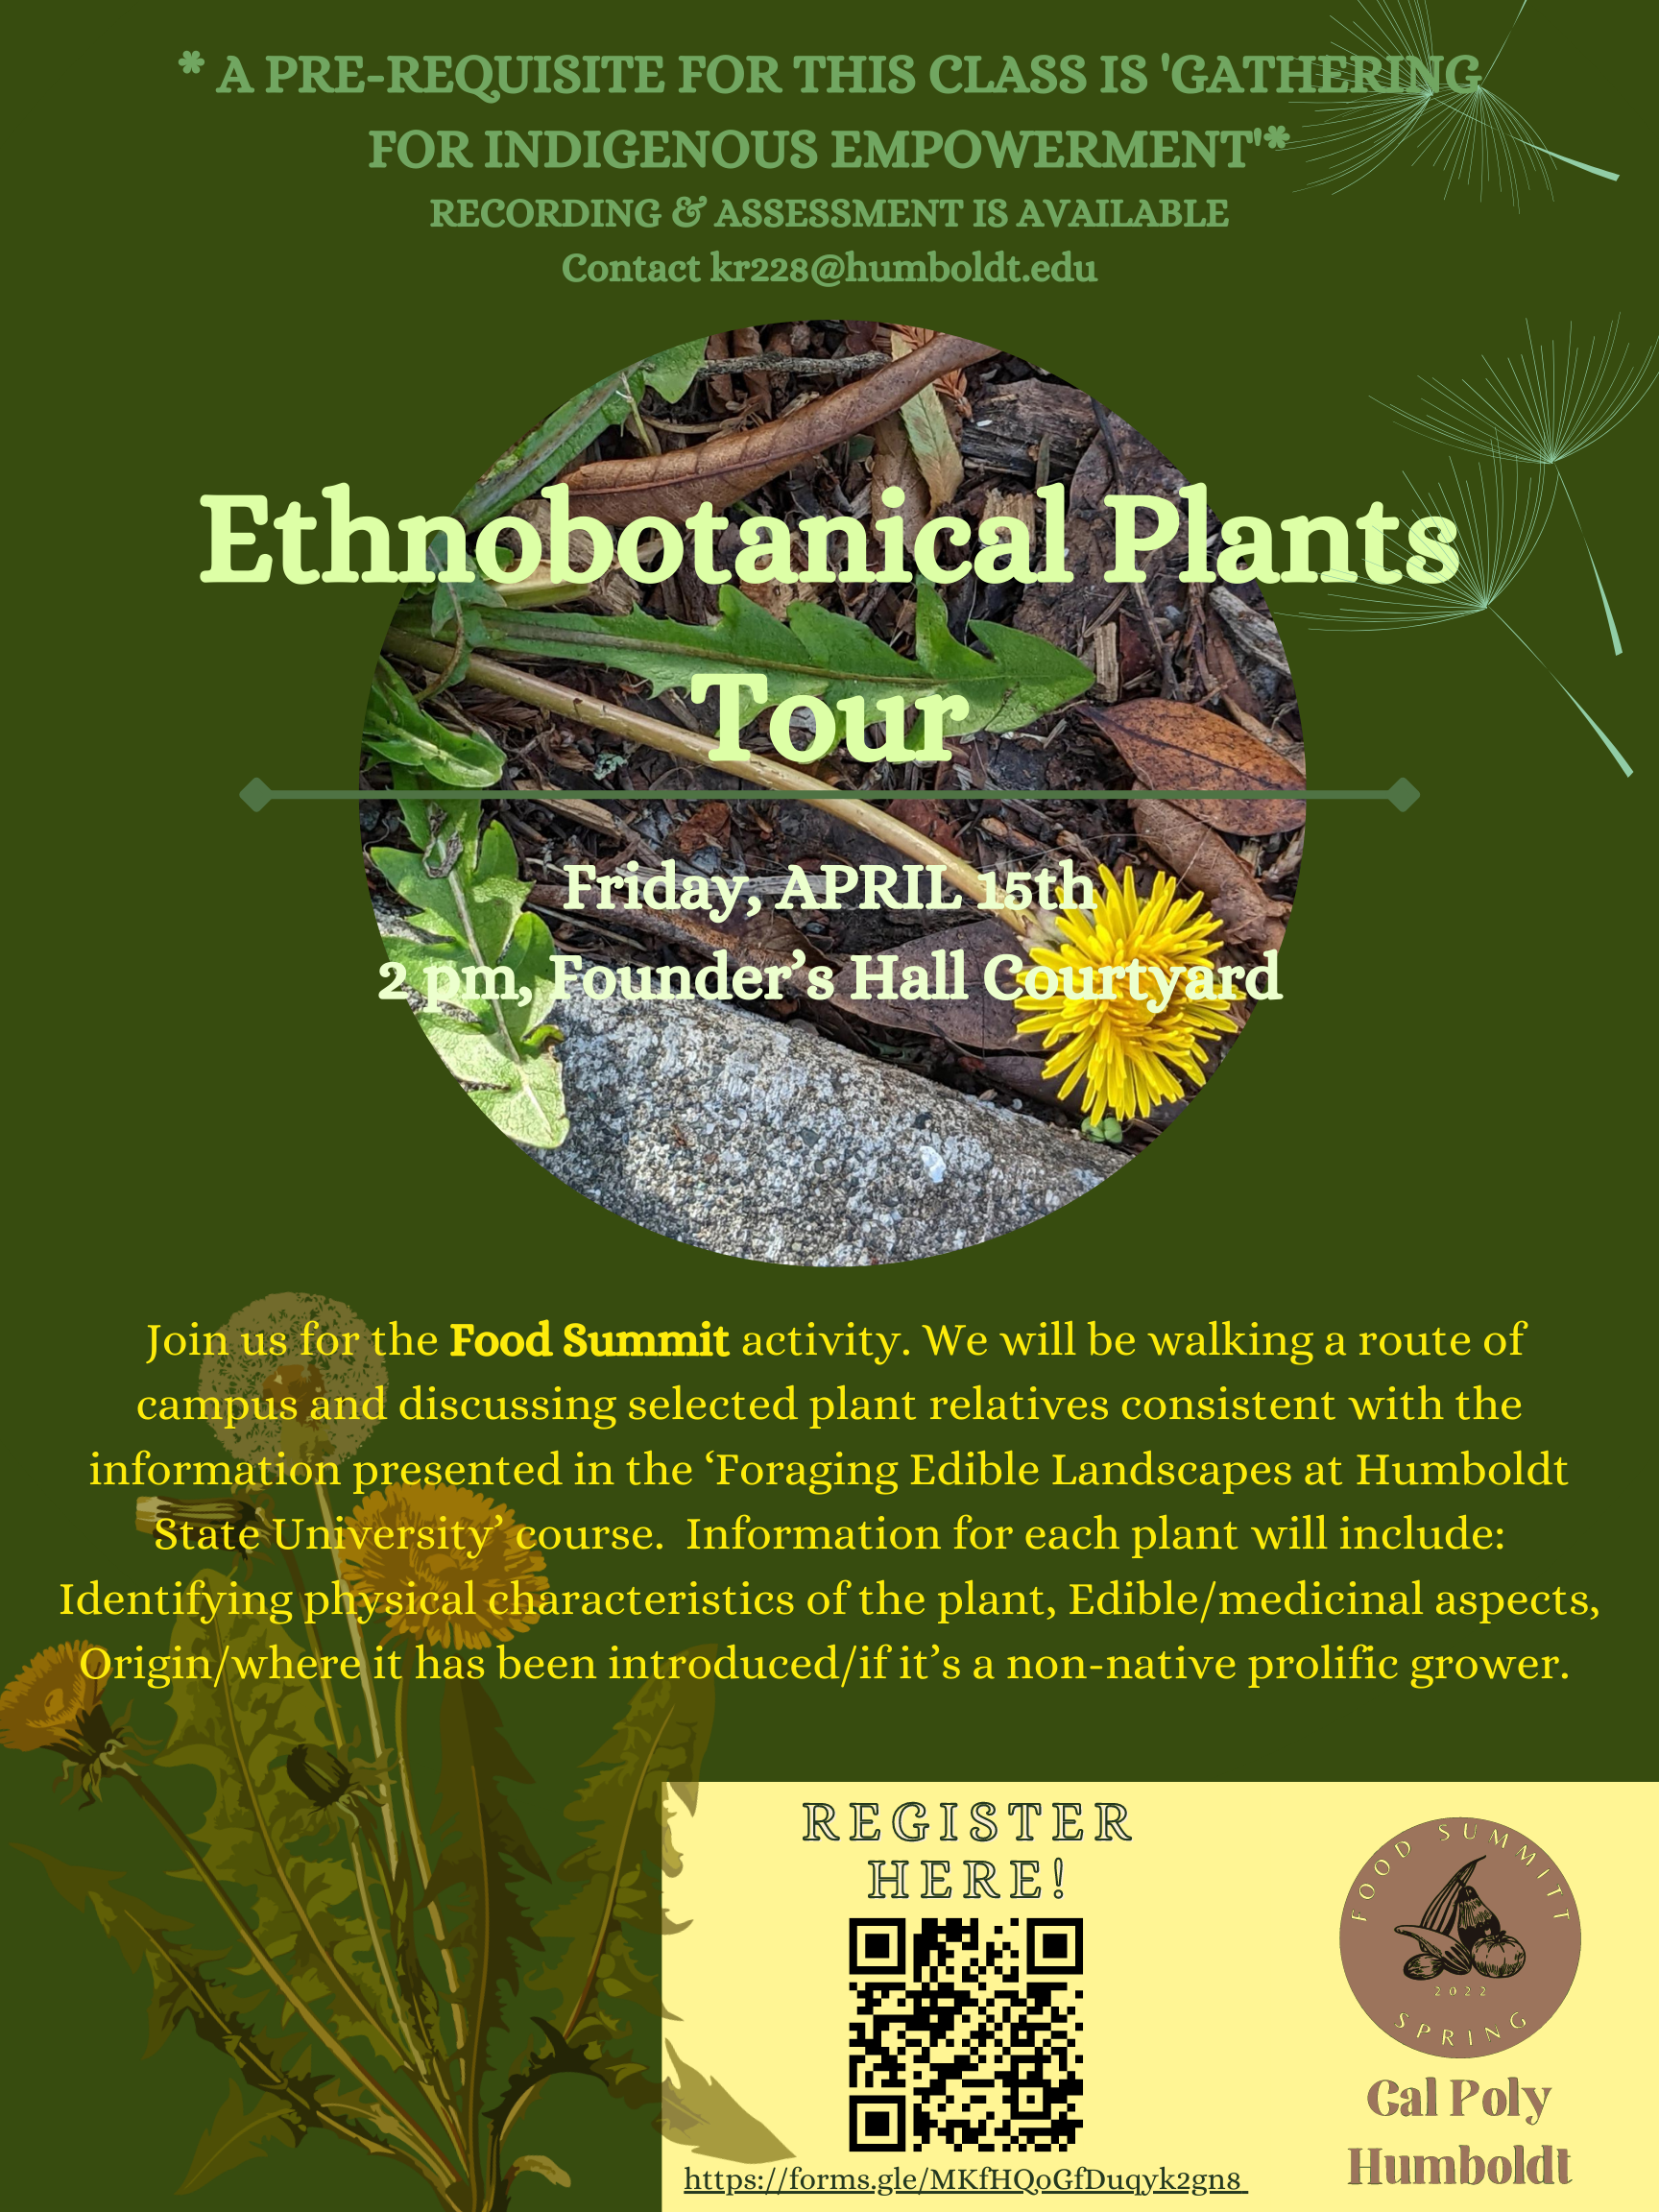 Friday April 15  Ethnobotanical Plants Tour around campus 2 pm, Founder’s Hall Courtyard